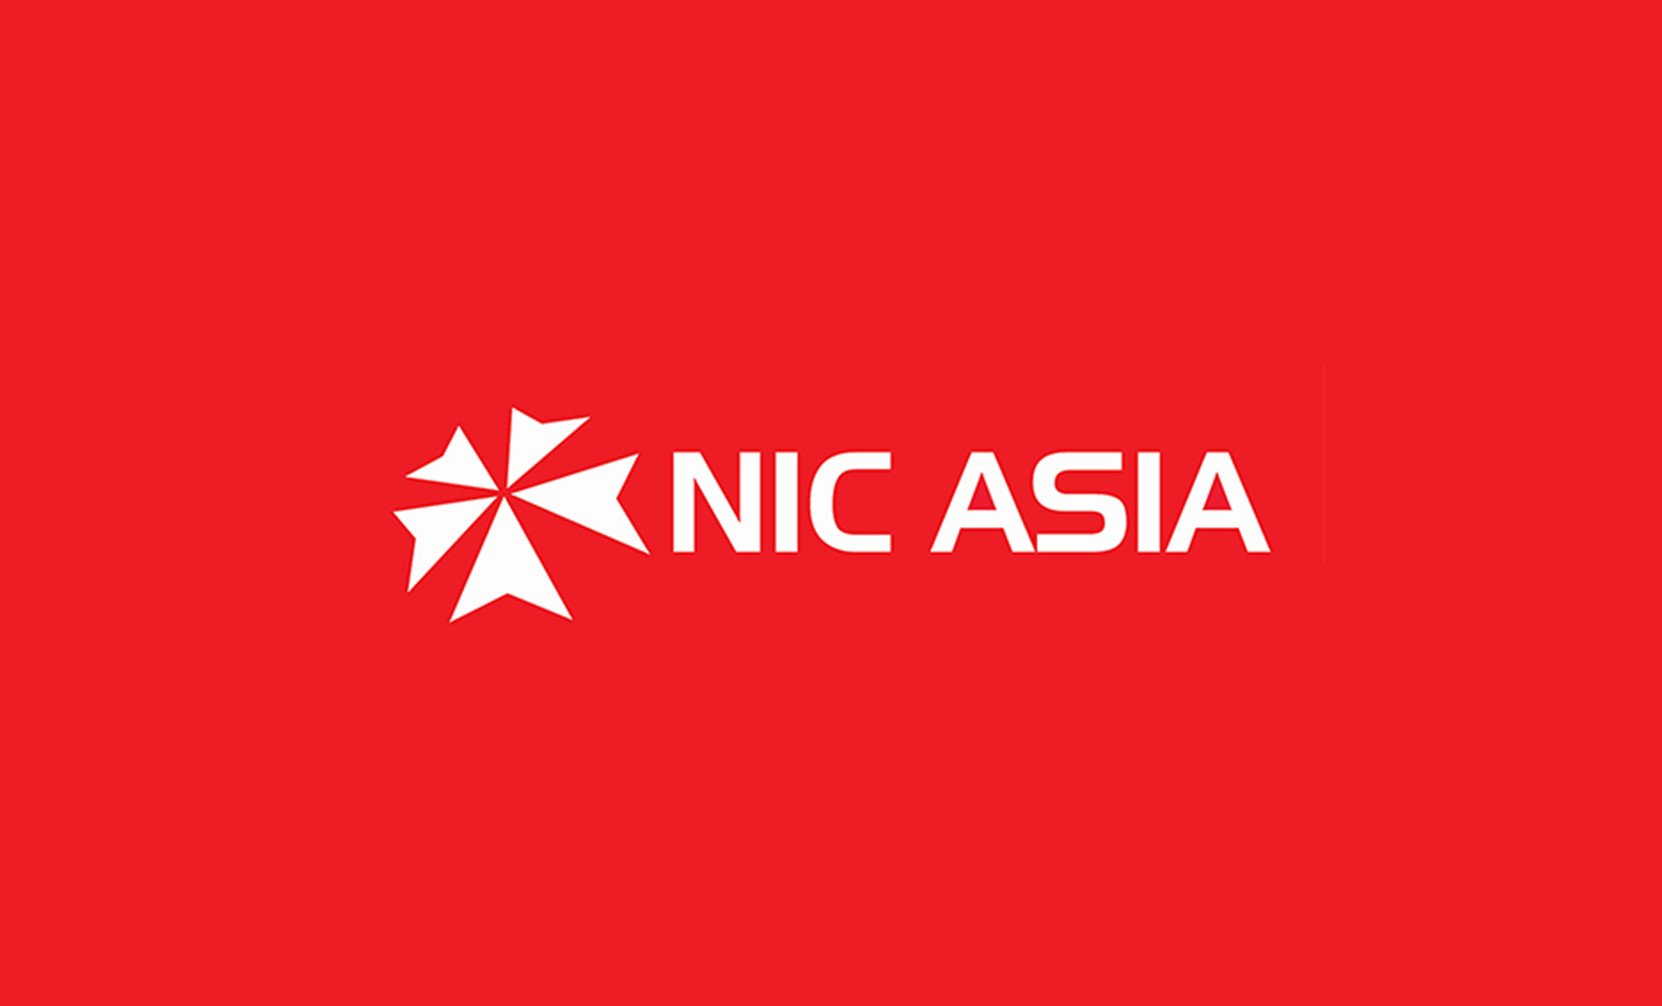 Nic Asia Bank Limited